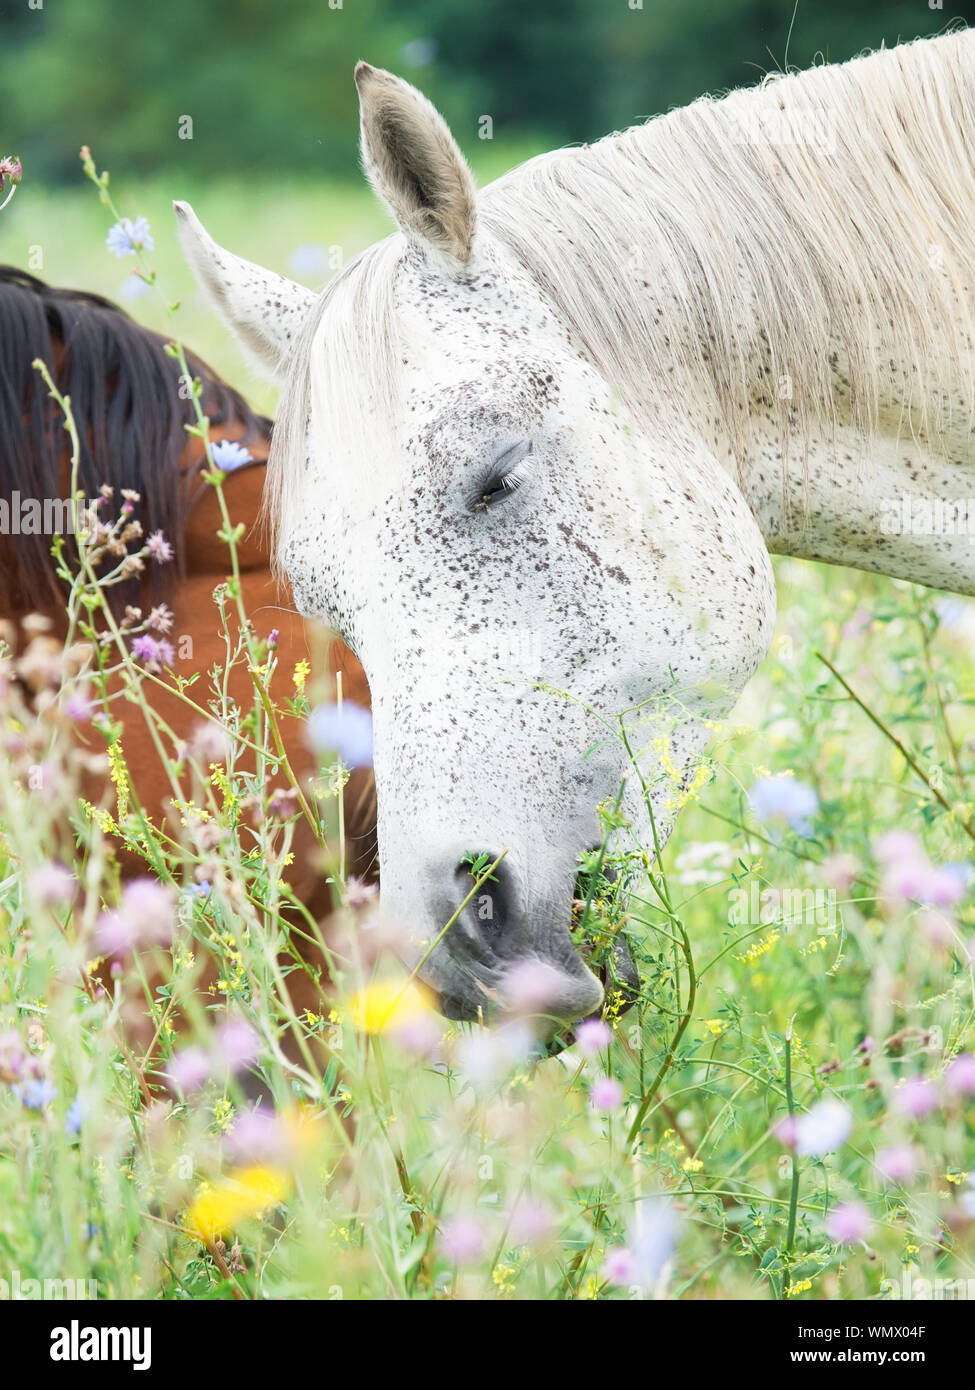 Close-up Of Horse Grazing On Land Stock Photo